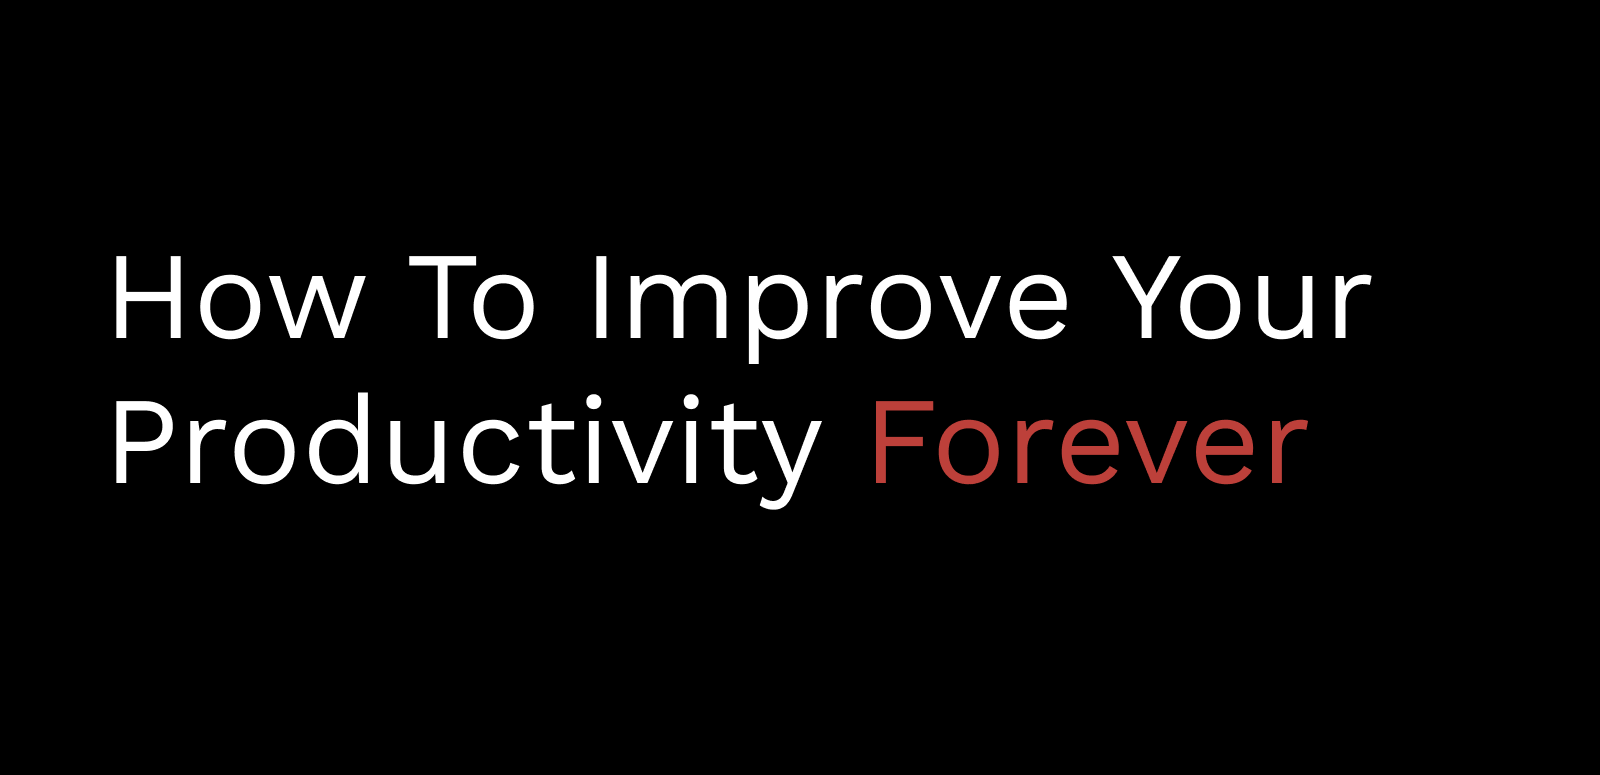 How To Improve Your Productivity Forever